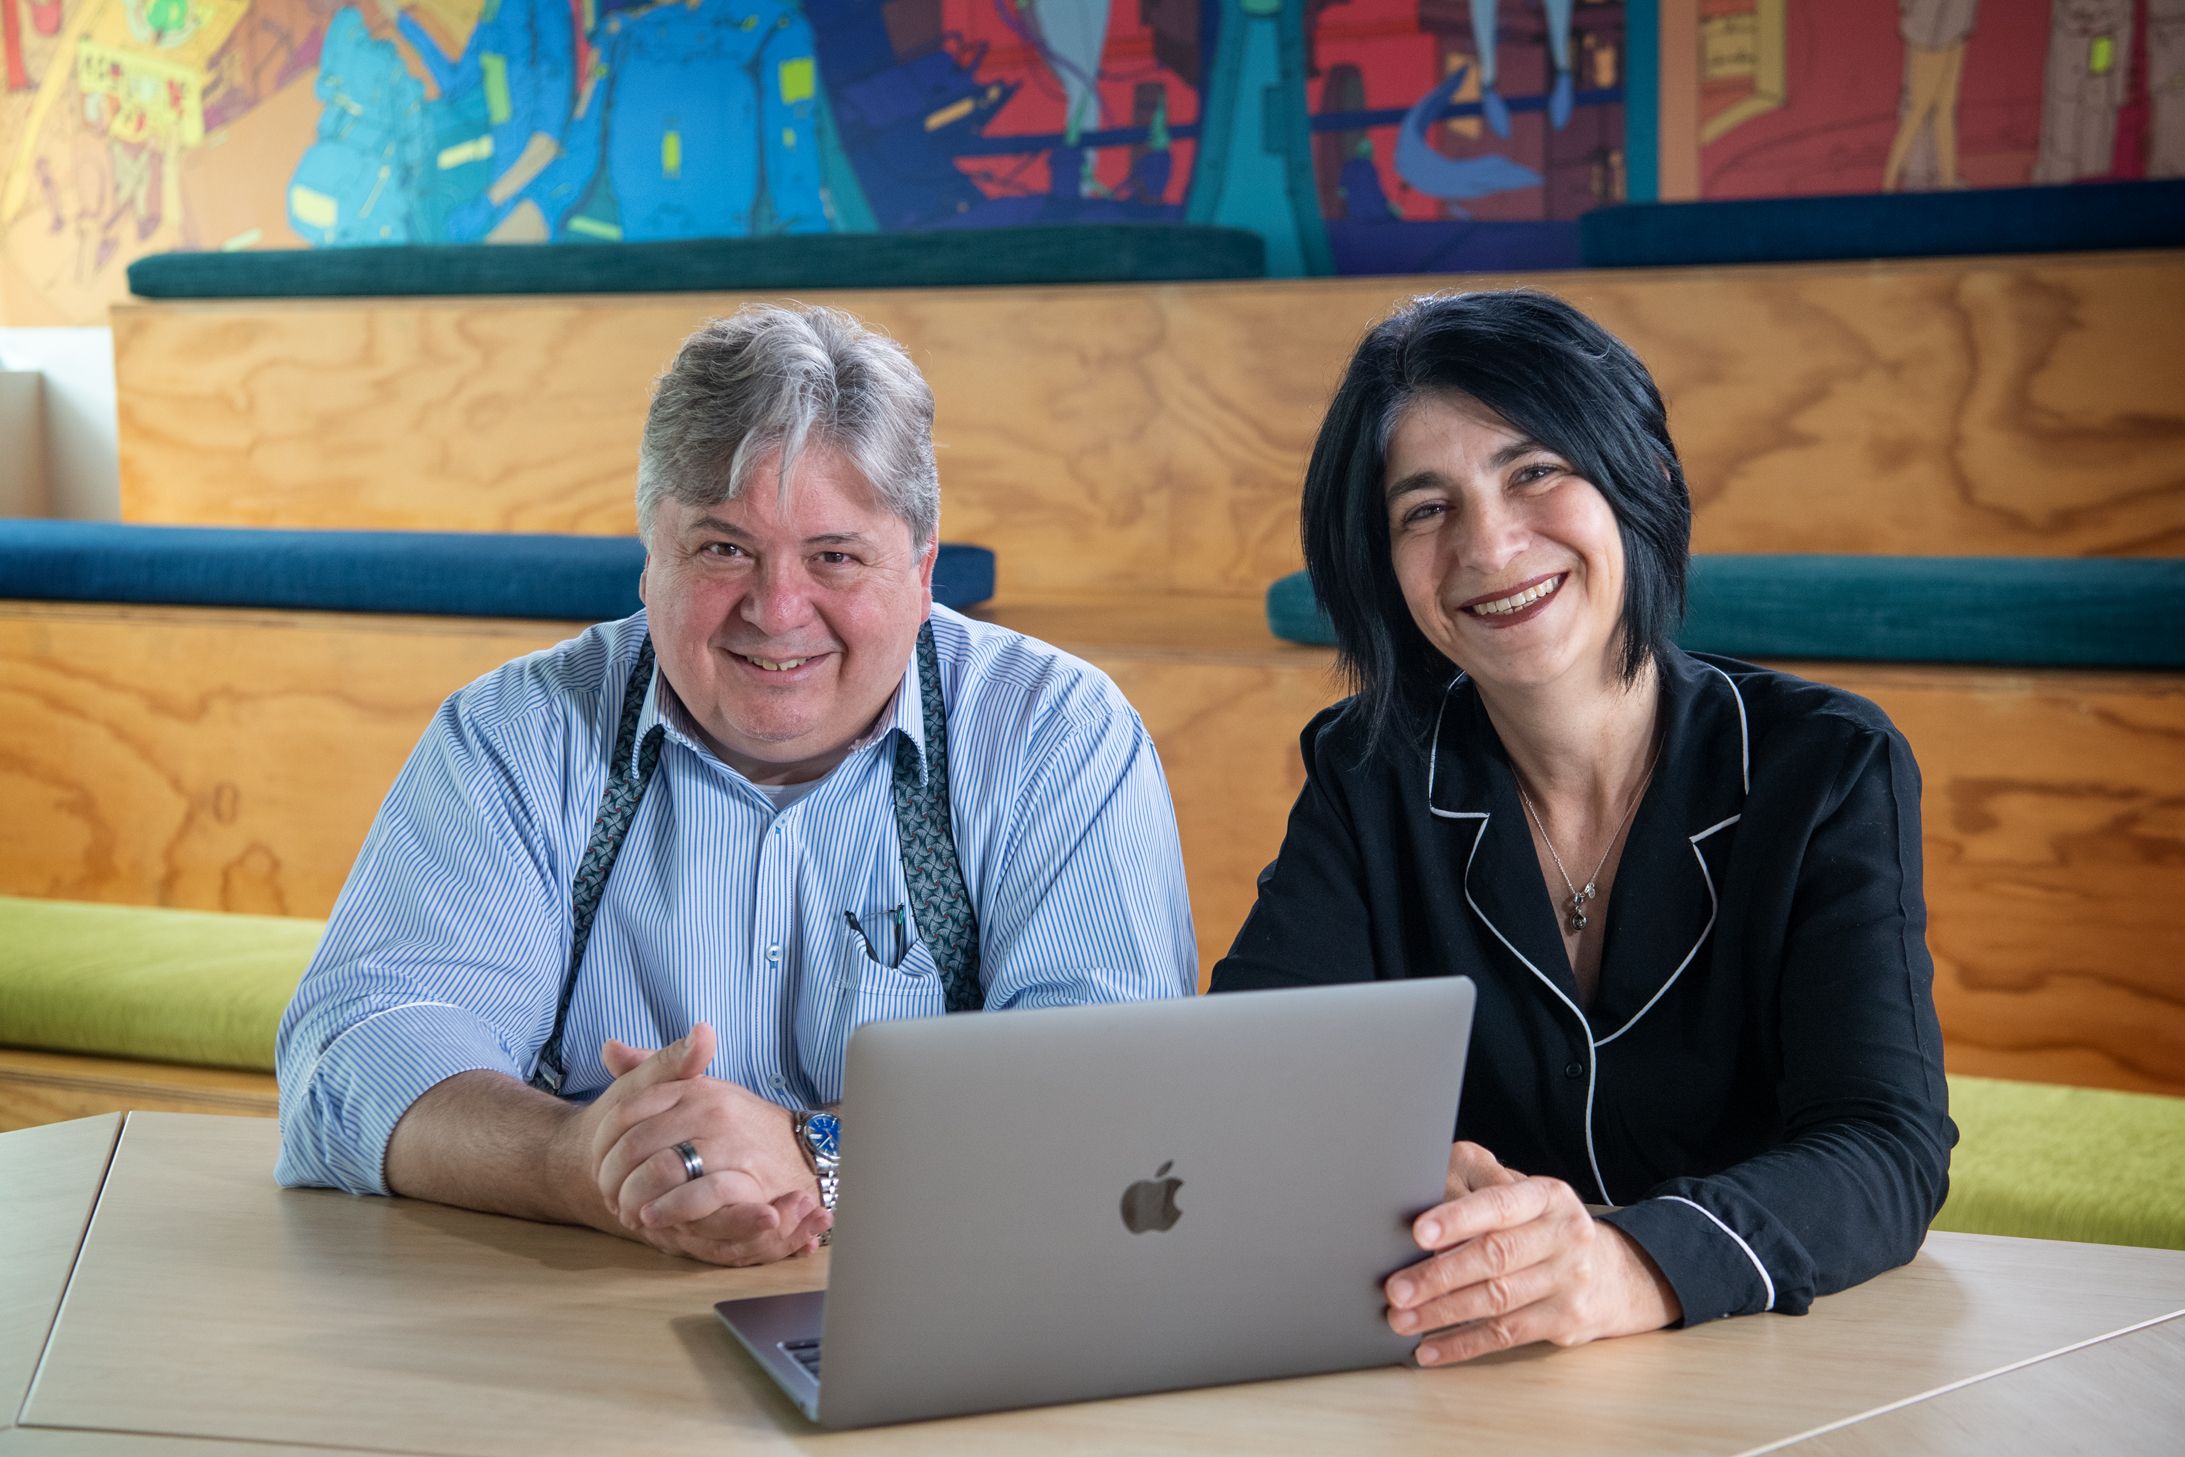 Christopher pictured left in a blue button up shirt and smiling. Gabrielle in a long-sleeve black top smiling with a Mac laptop in front of her on a table